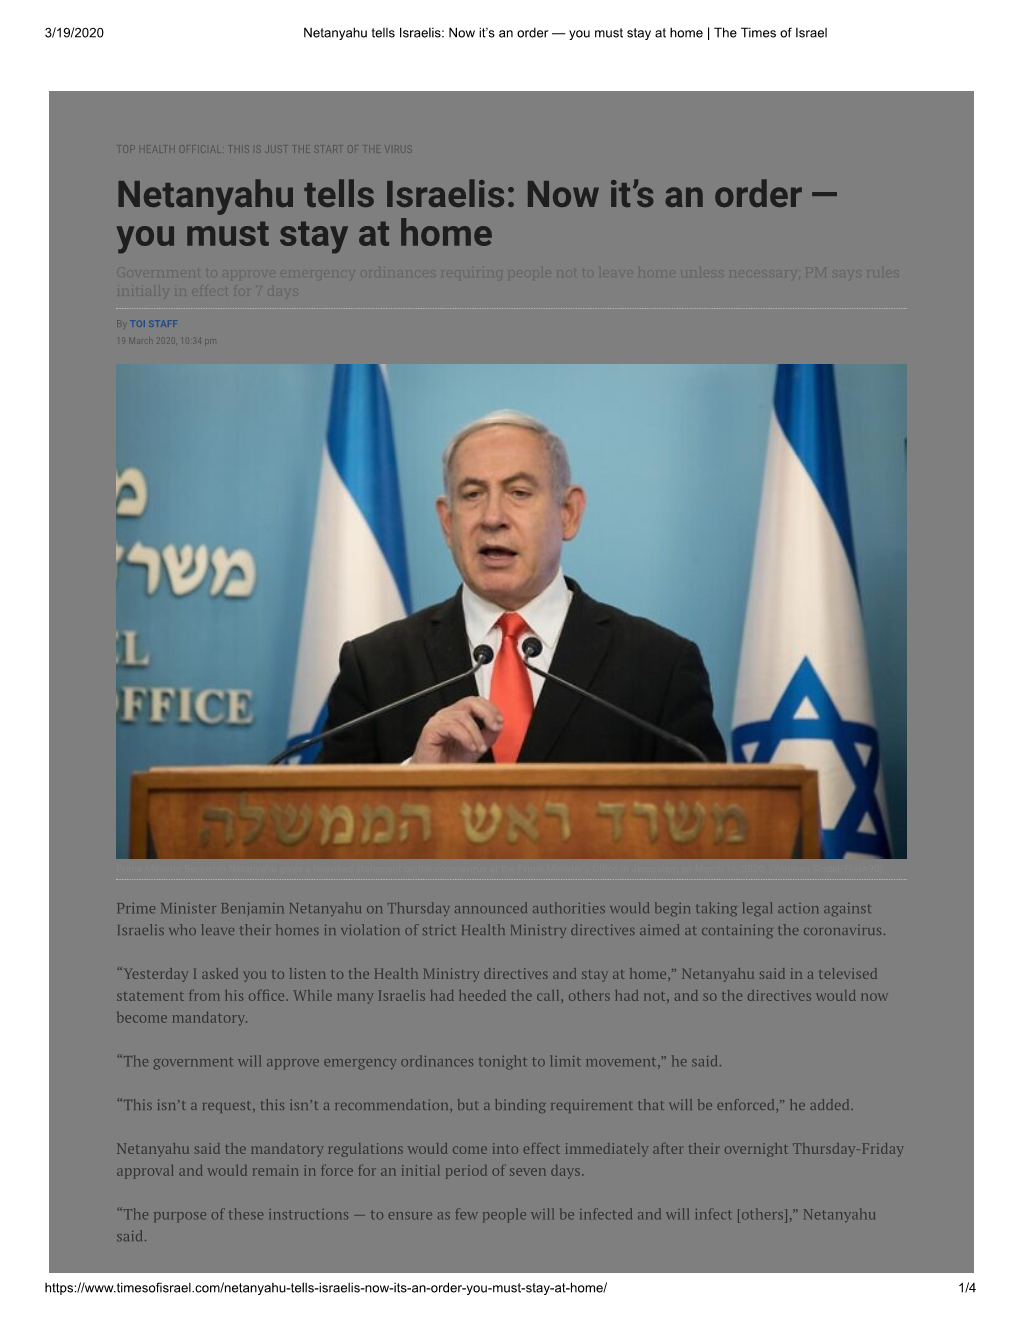 Netanyahu Tells Israelis: Now It’S an Order — You Must Stay at Home | the Times of Israel